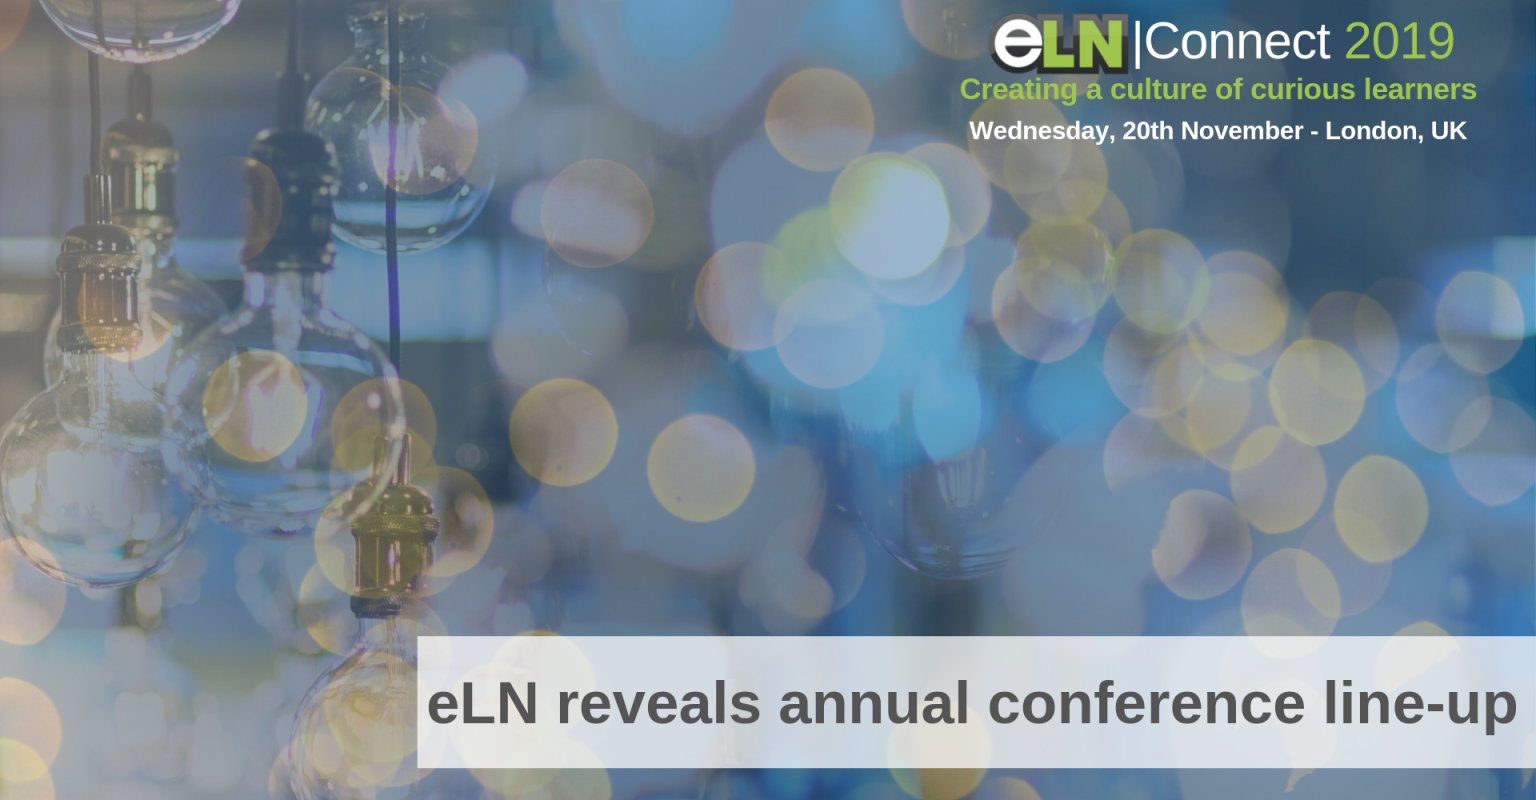 eLN announce annual conference line-up